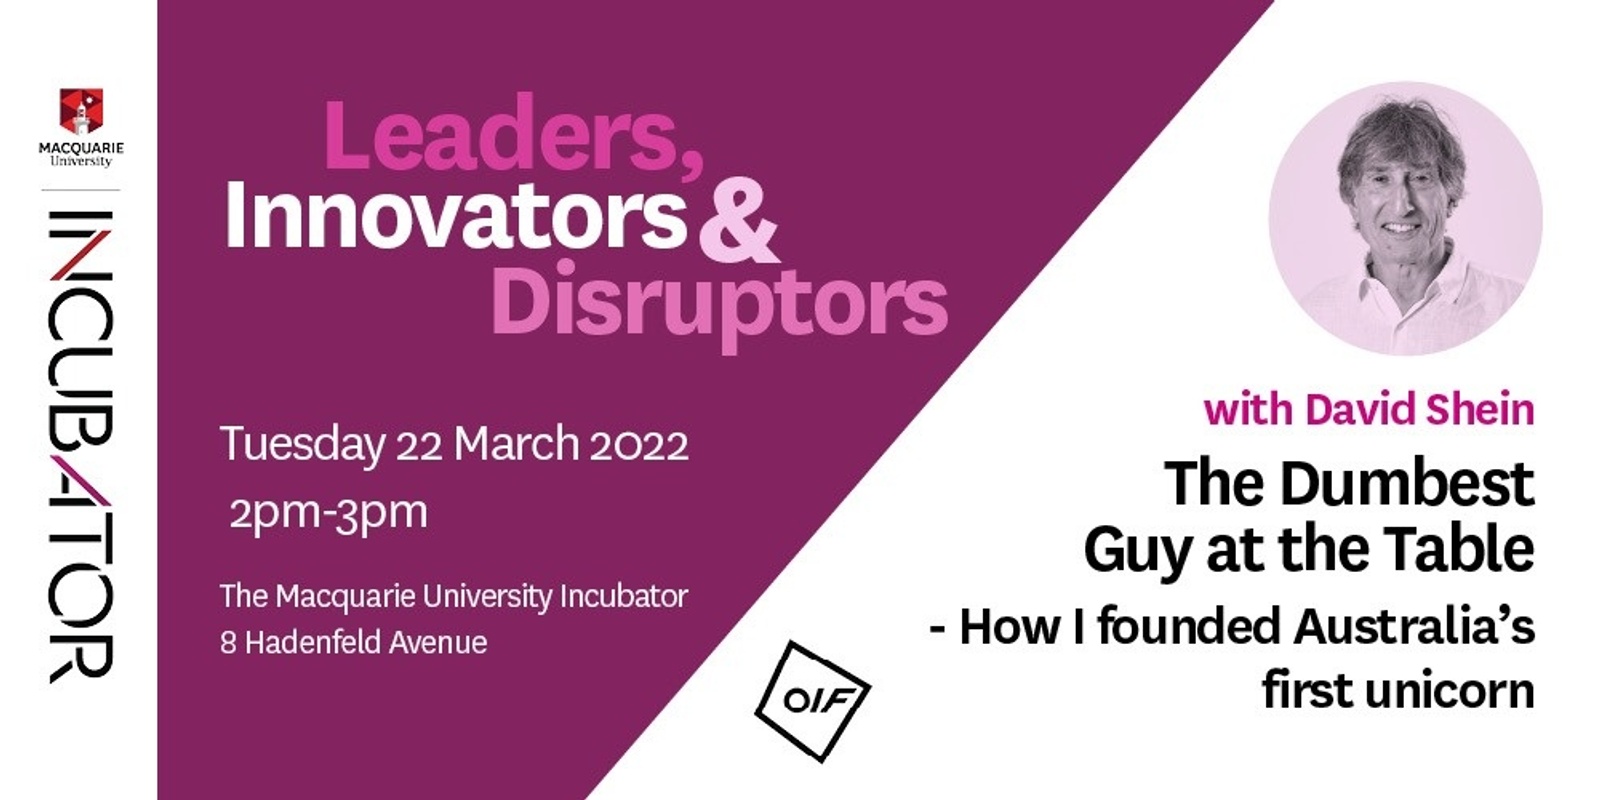 Banner image for Leaders, Innovators & Disruptors event with David Shein | The Dumbest Guy at the Table - How I founded Australia's first unicorn 